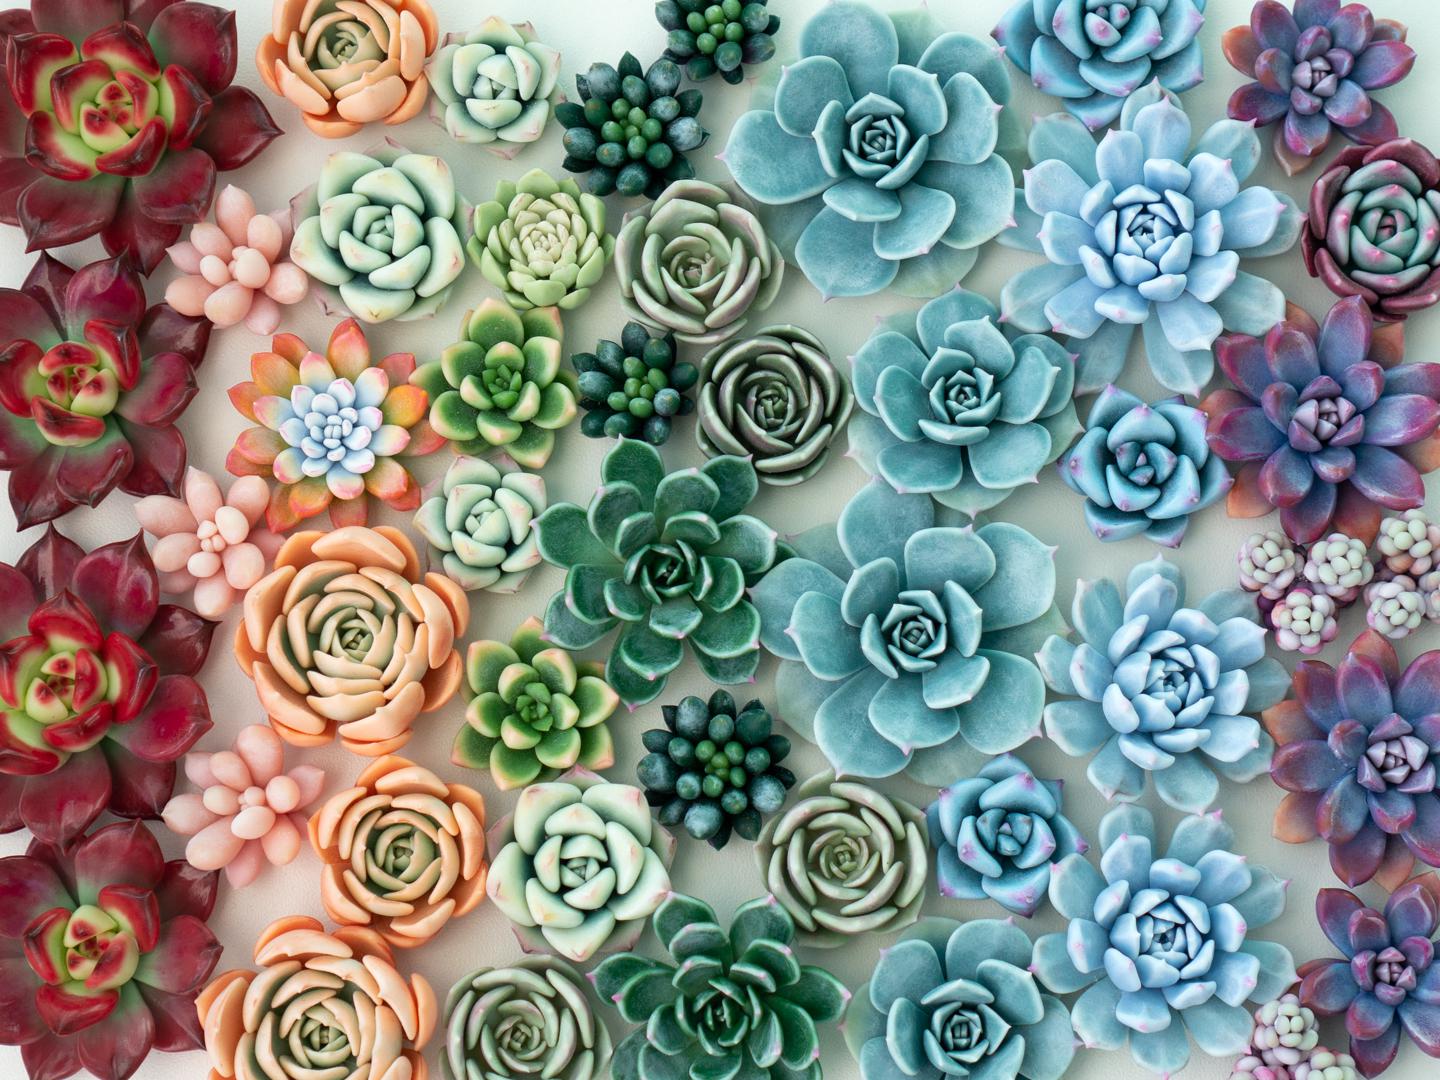 A collection of succulents in various colors - Succulent